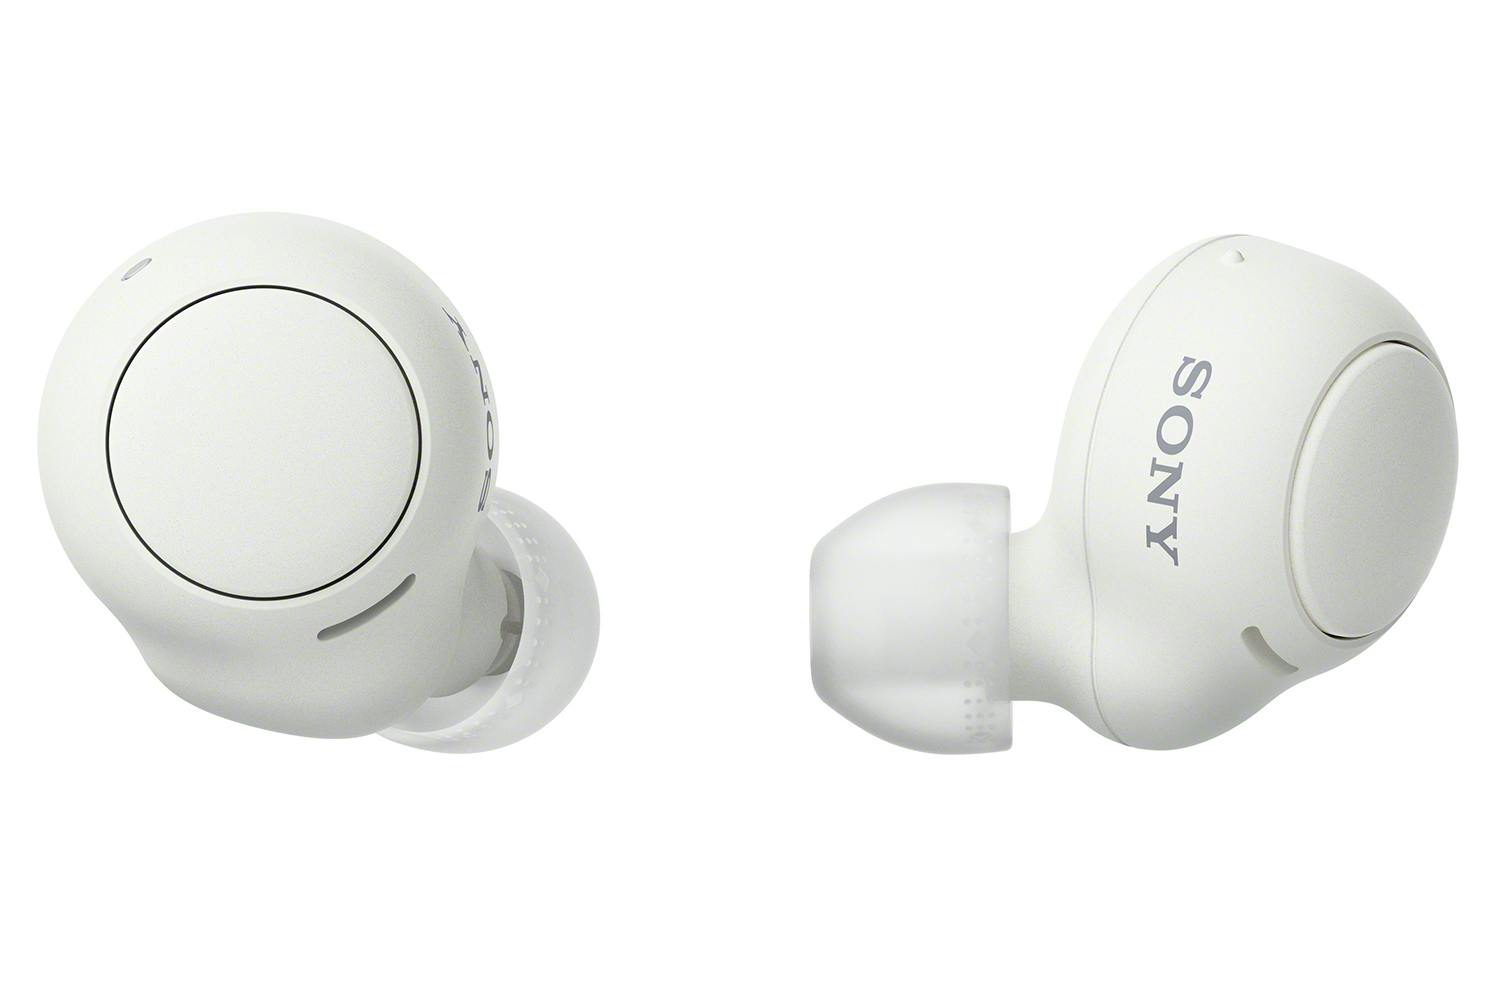 Sony WF-C500 review: budget earbuds for comfortable listening